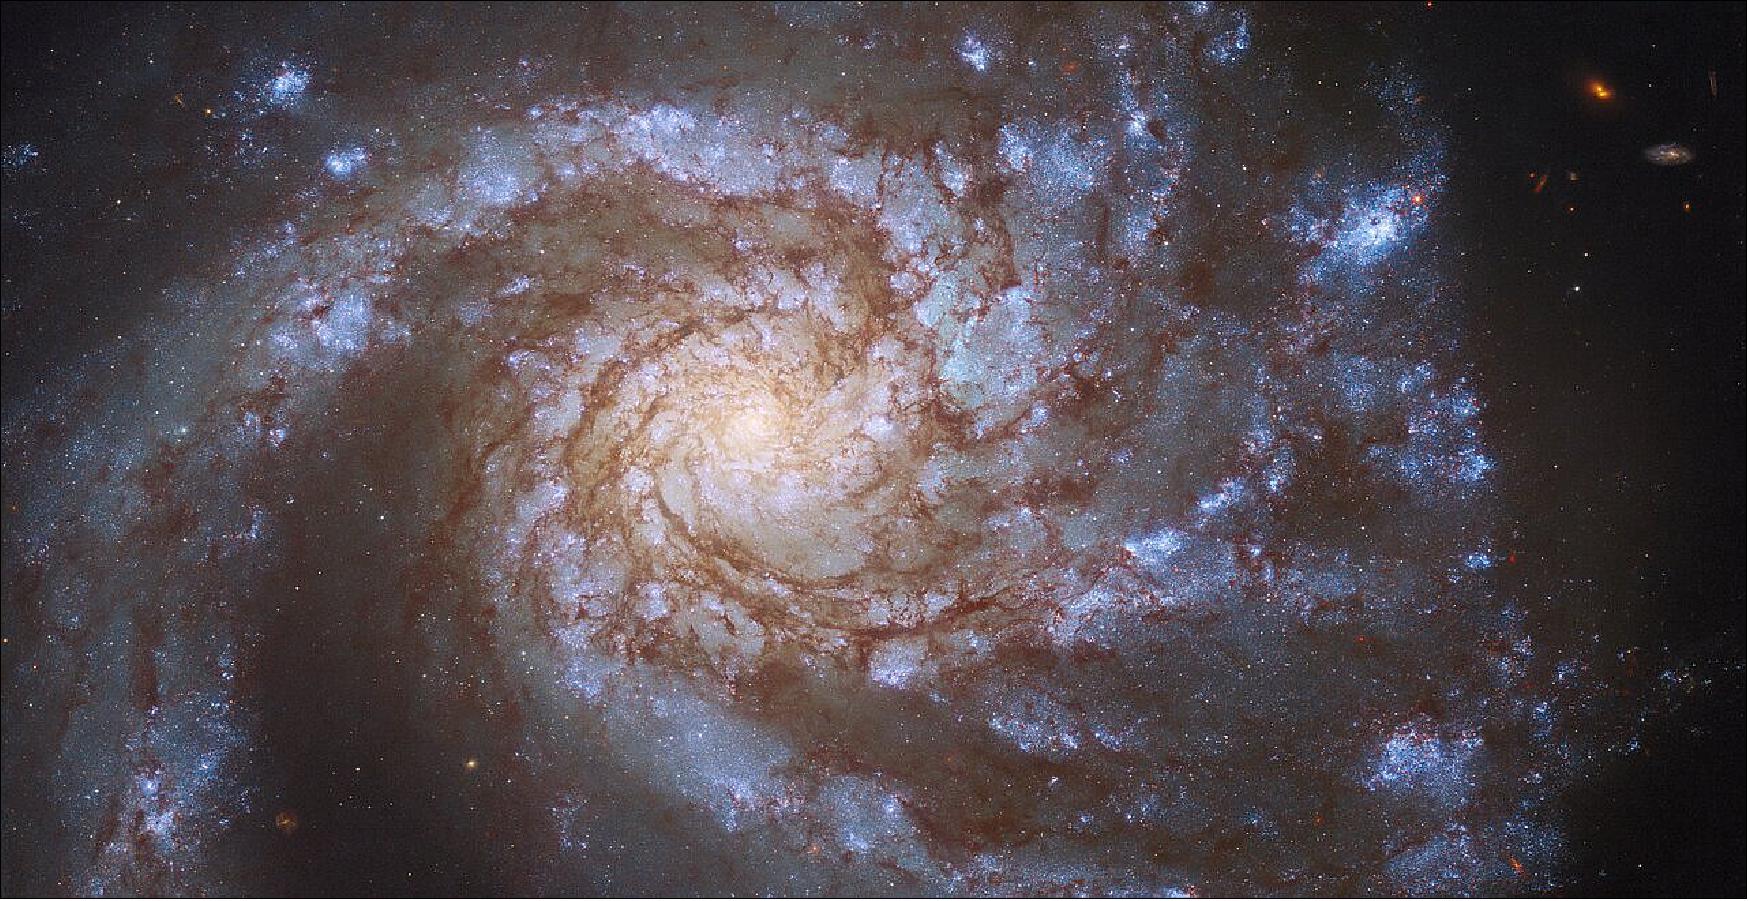 Figure 48: The magnificent spiral galaxy M99 fills the frame in this image from the NASA/ESA Hubble Space Telescope. M99 — which lies roughly 42 million light-years from Earth in the constellation Coma Berenices — is a “grand design” spiral galaxy, so-called because of the well-defined, prominent spiral arms visible in this image (image credit: ESA/Hubble & NASA, M. Kasliwal, J. Lee and the PHANGS-HST Team)